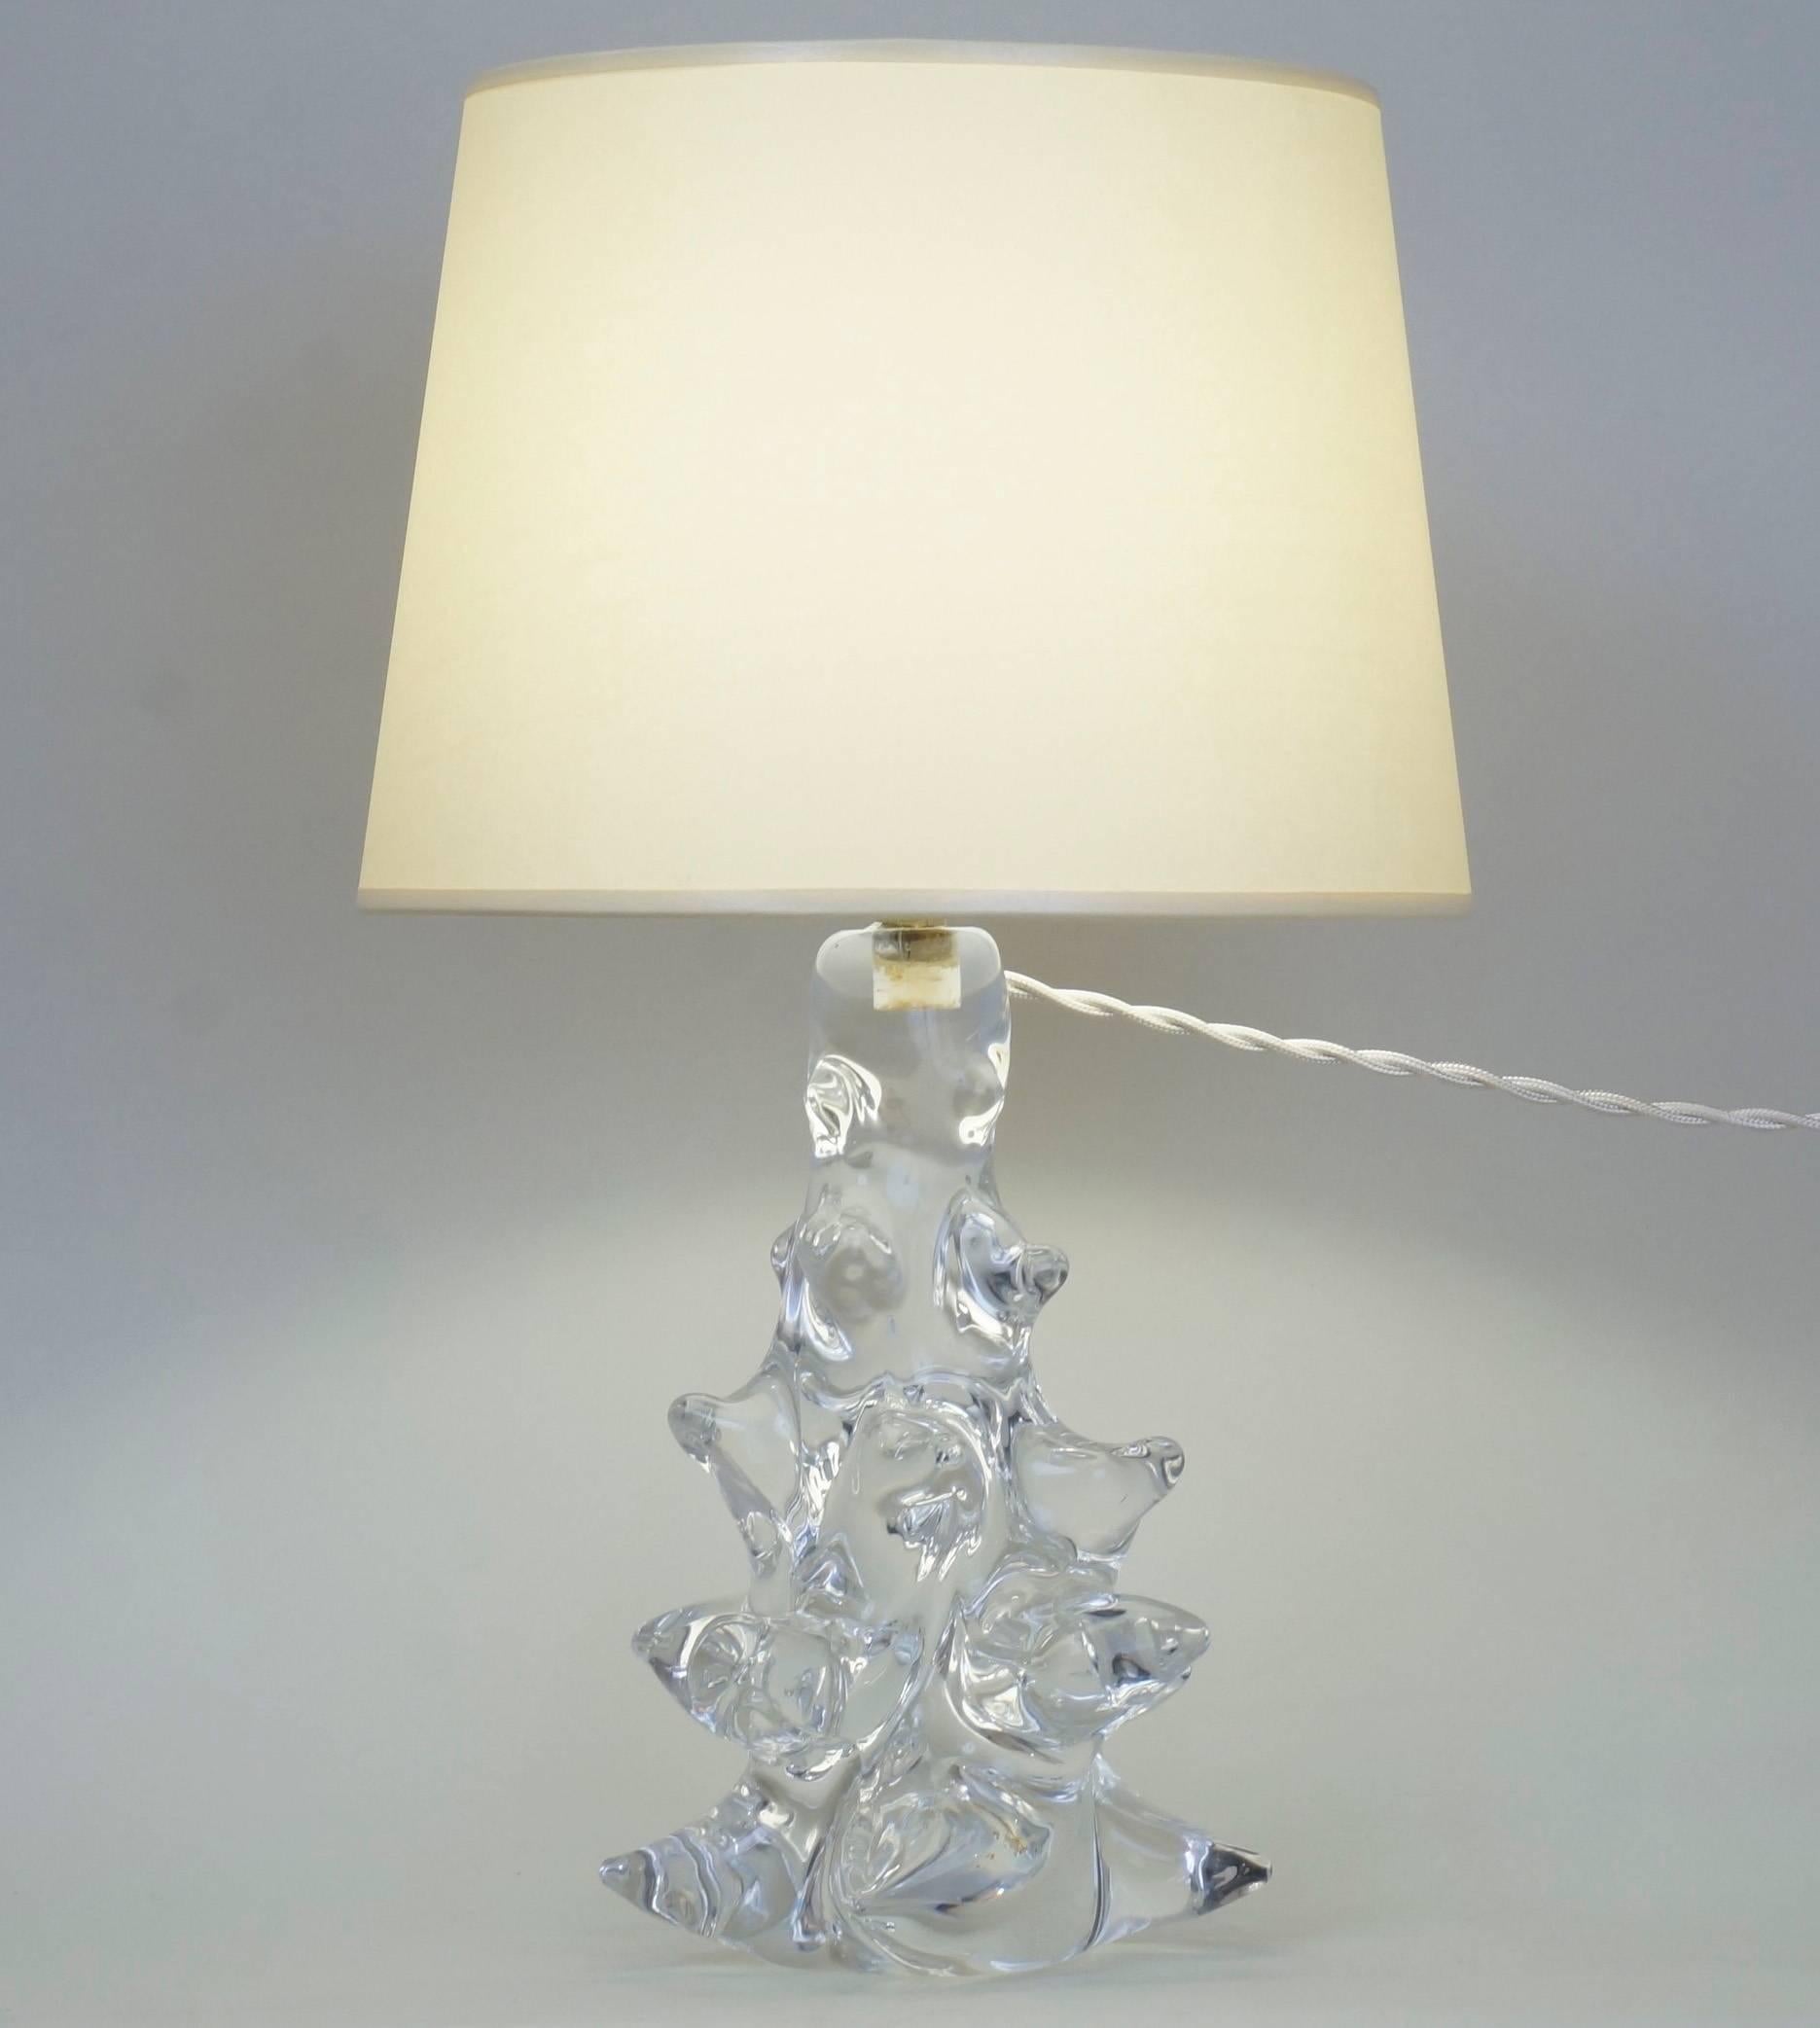 Crystal table lamp, signed Schneider.
Custom-made fabric lampshades.
Rewired with twisted silk cord.
US standard plug on request.
Crystal height: 21 cm - 8.3 in.
Height with lampshade: 37 cm – 14.6 in.
 